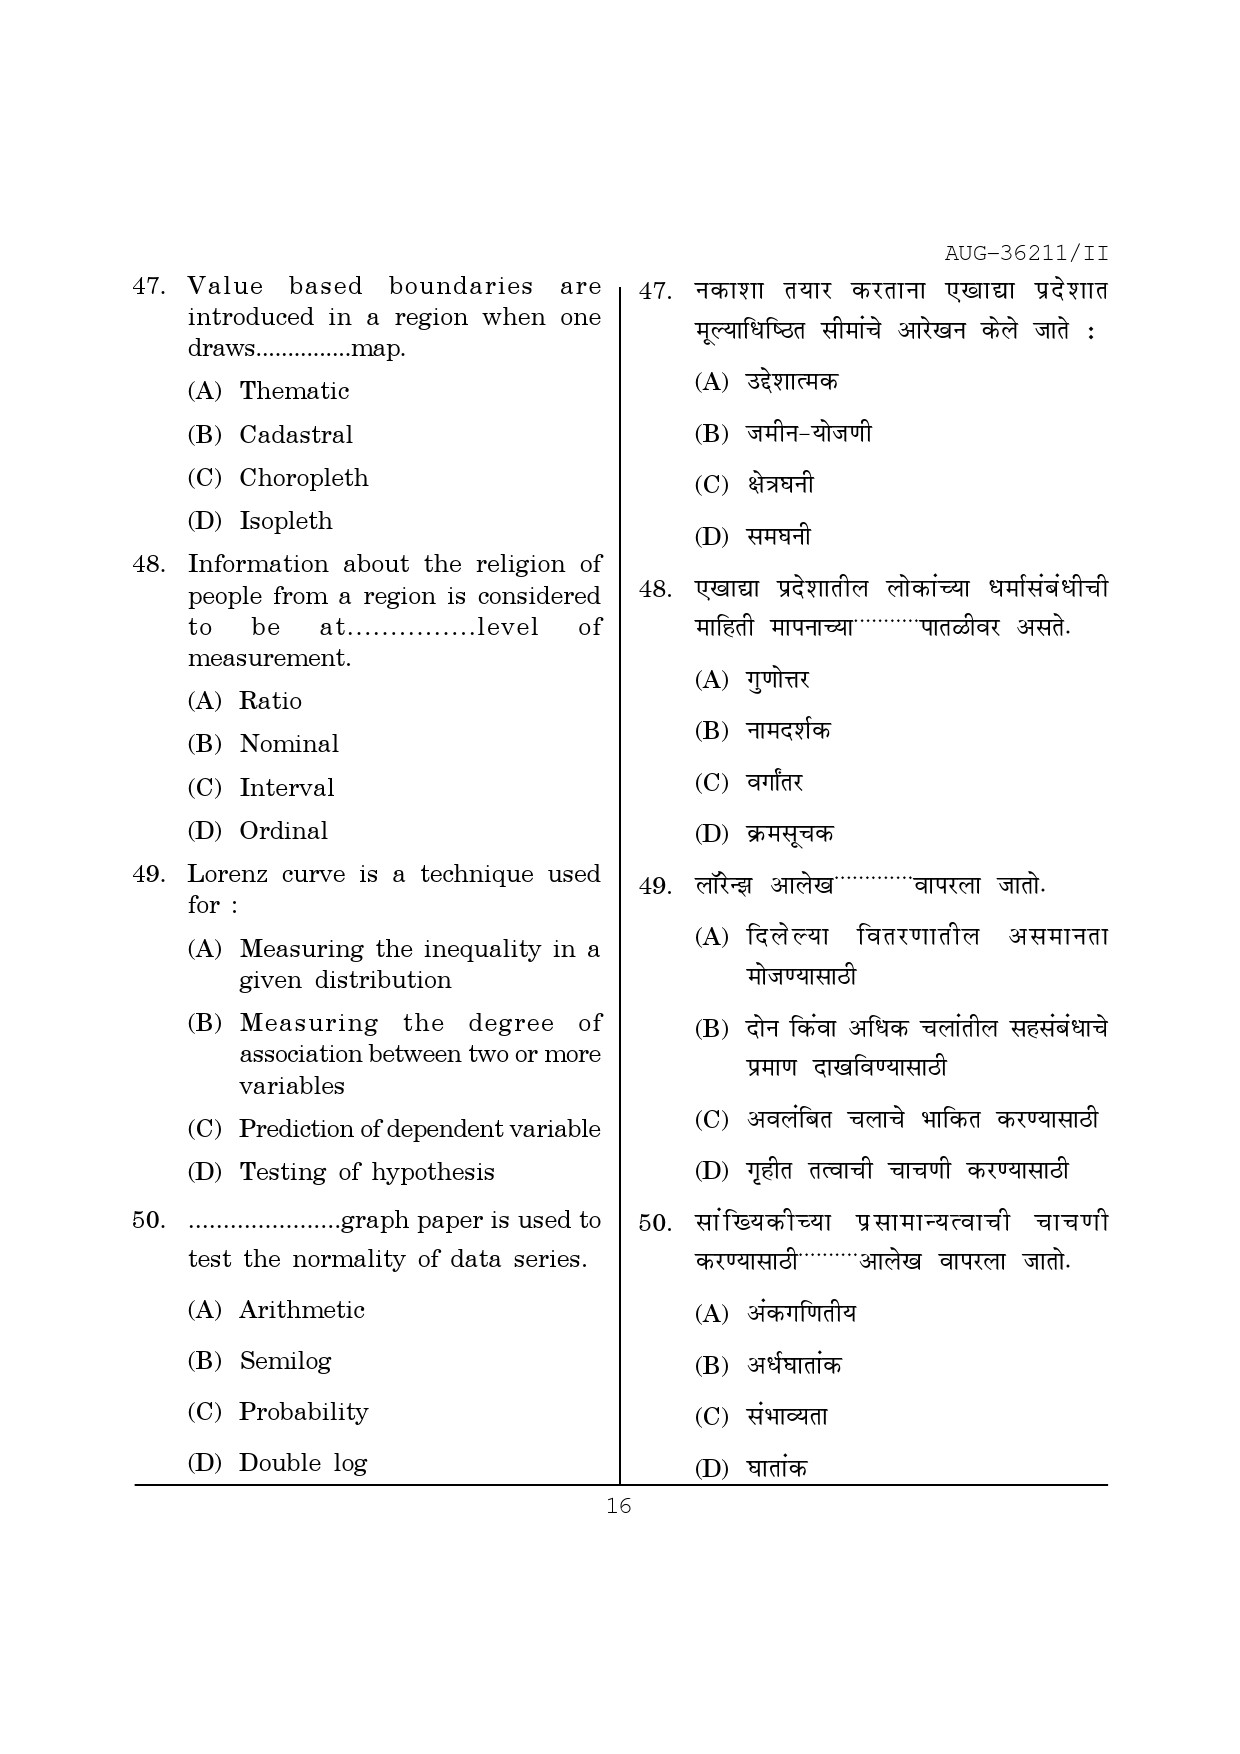 Maharashtra SET Geography Question Paper II August 2011 16